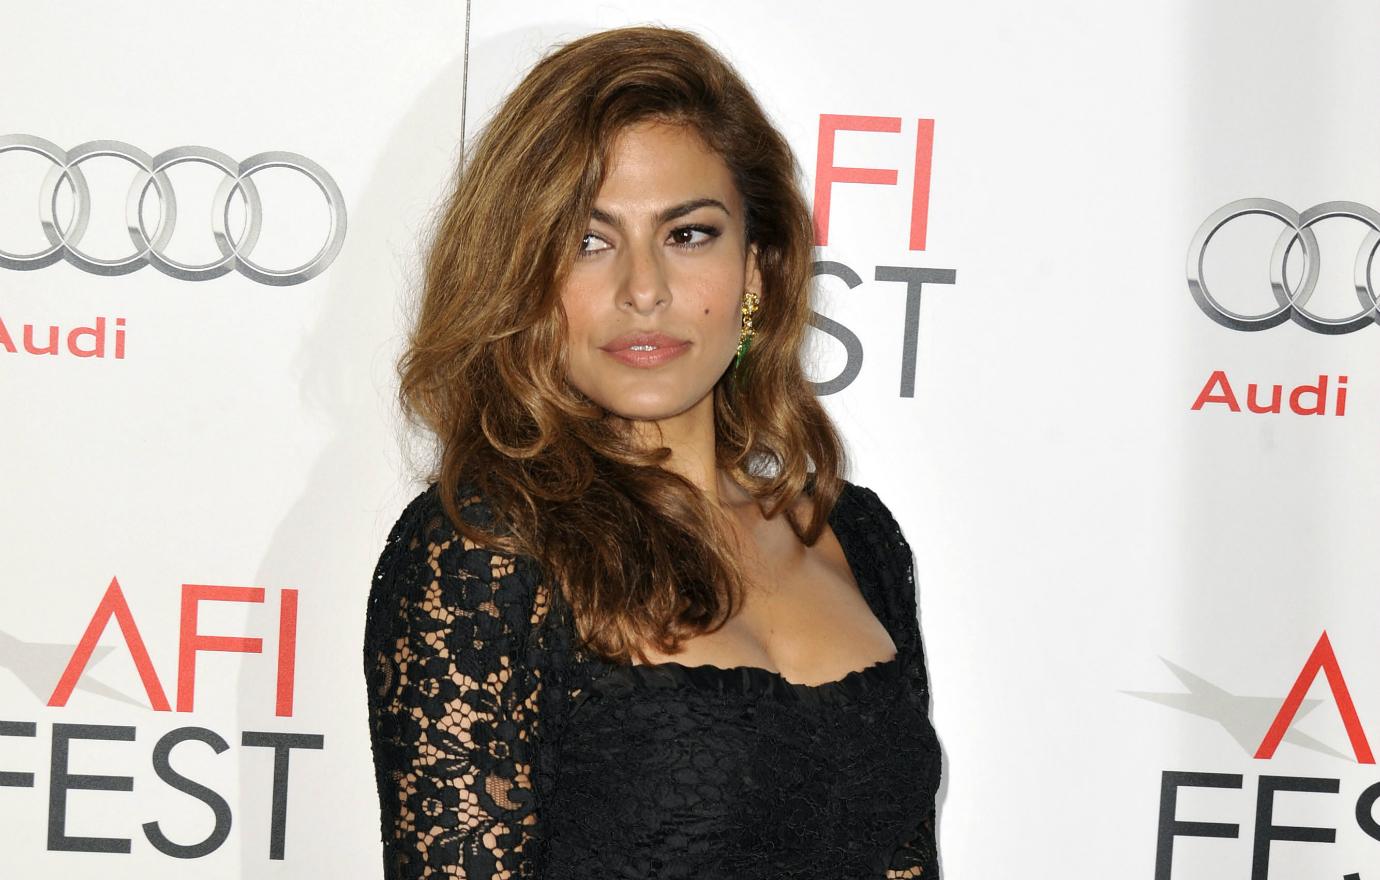 Eva Mendes wears a black lace dress, minimal makeup and hair worn down and wavy at the 2012 AFI fest.